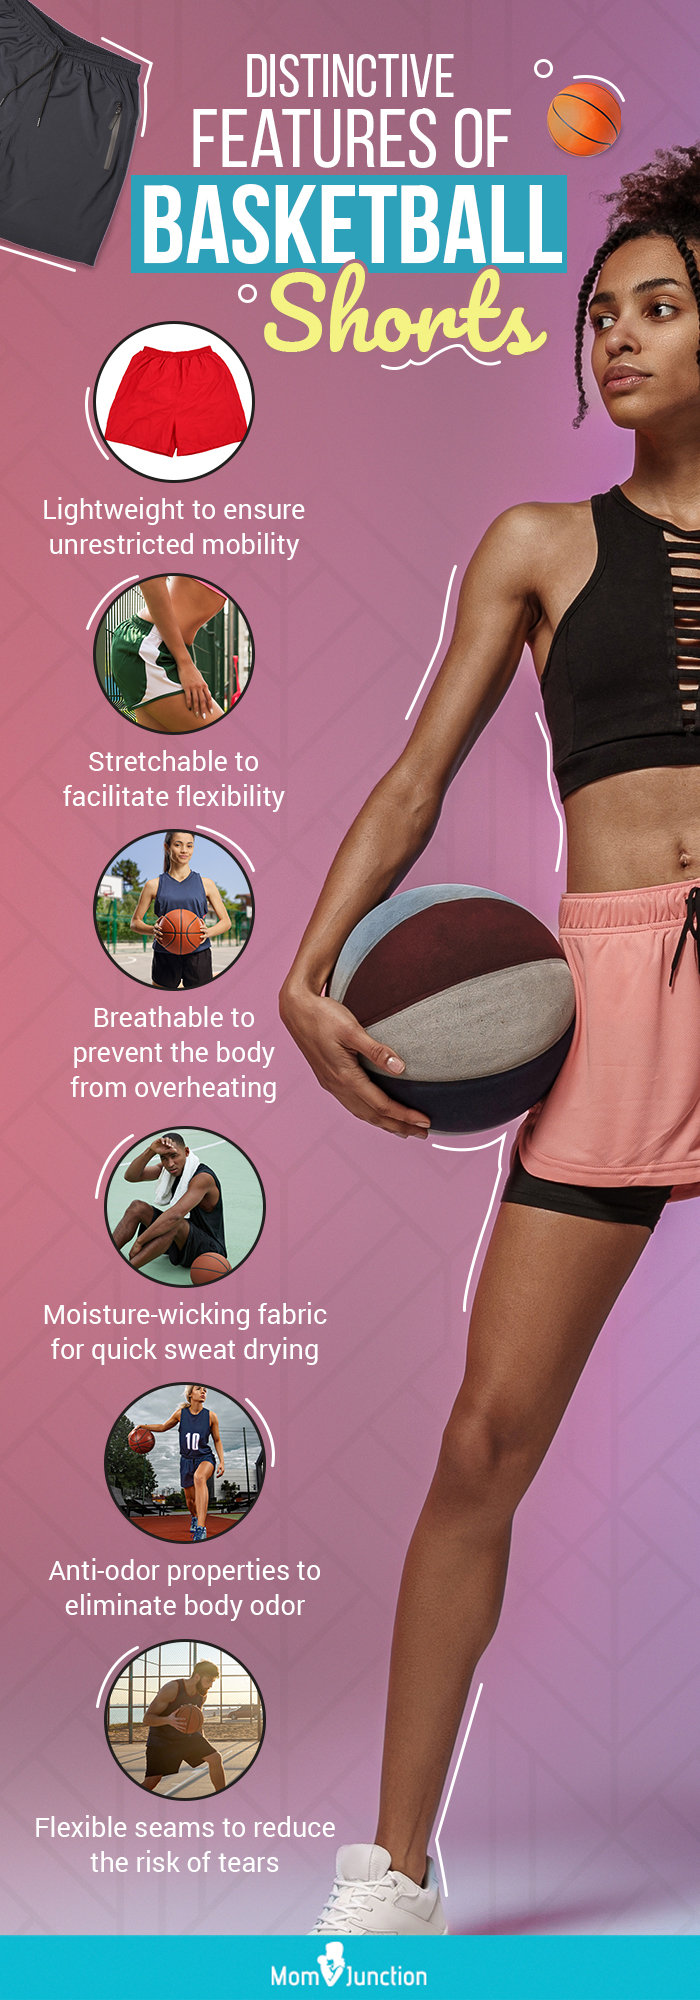 Distinctive Features Of Basketball Shorts (infographic)